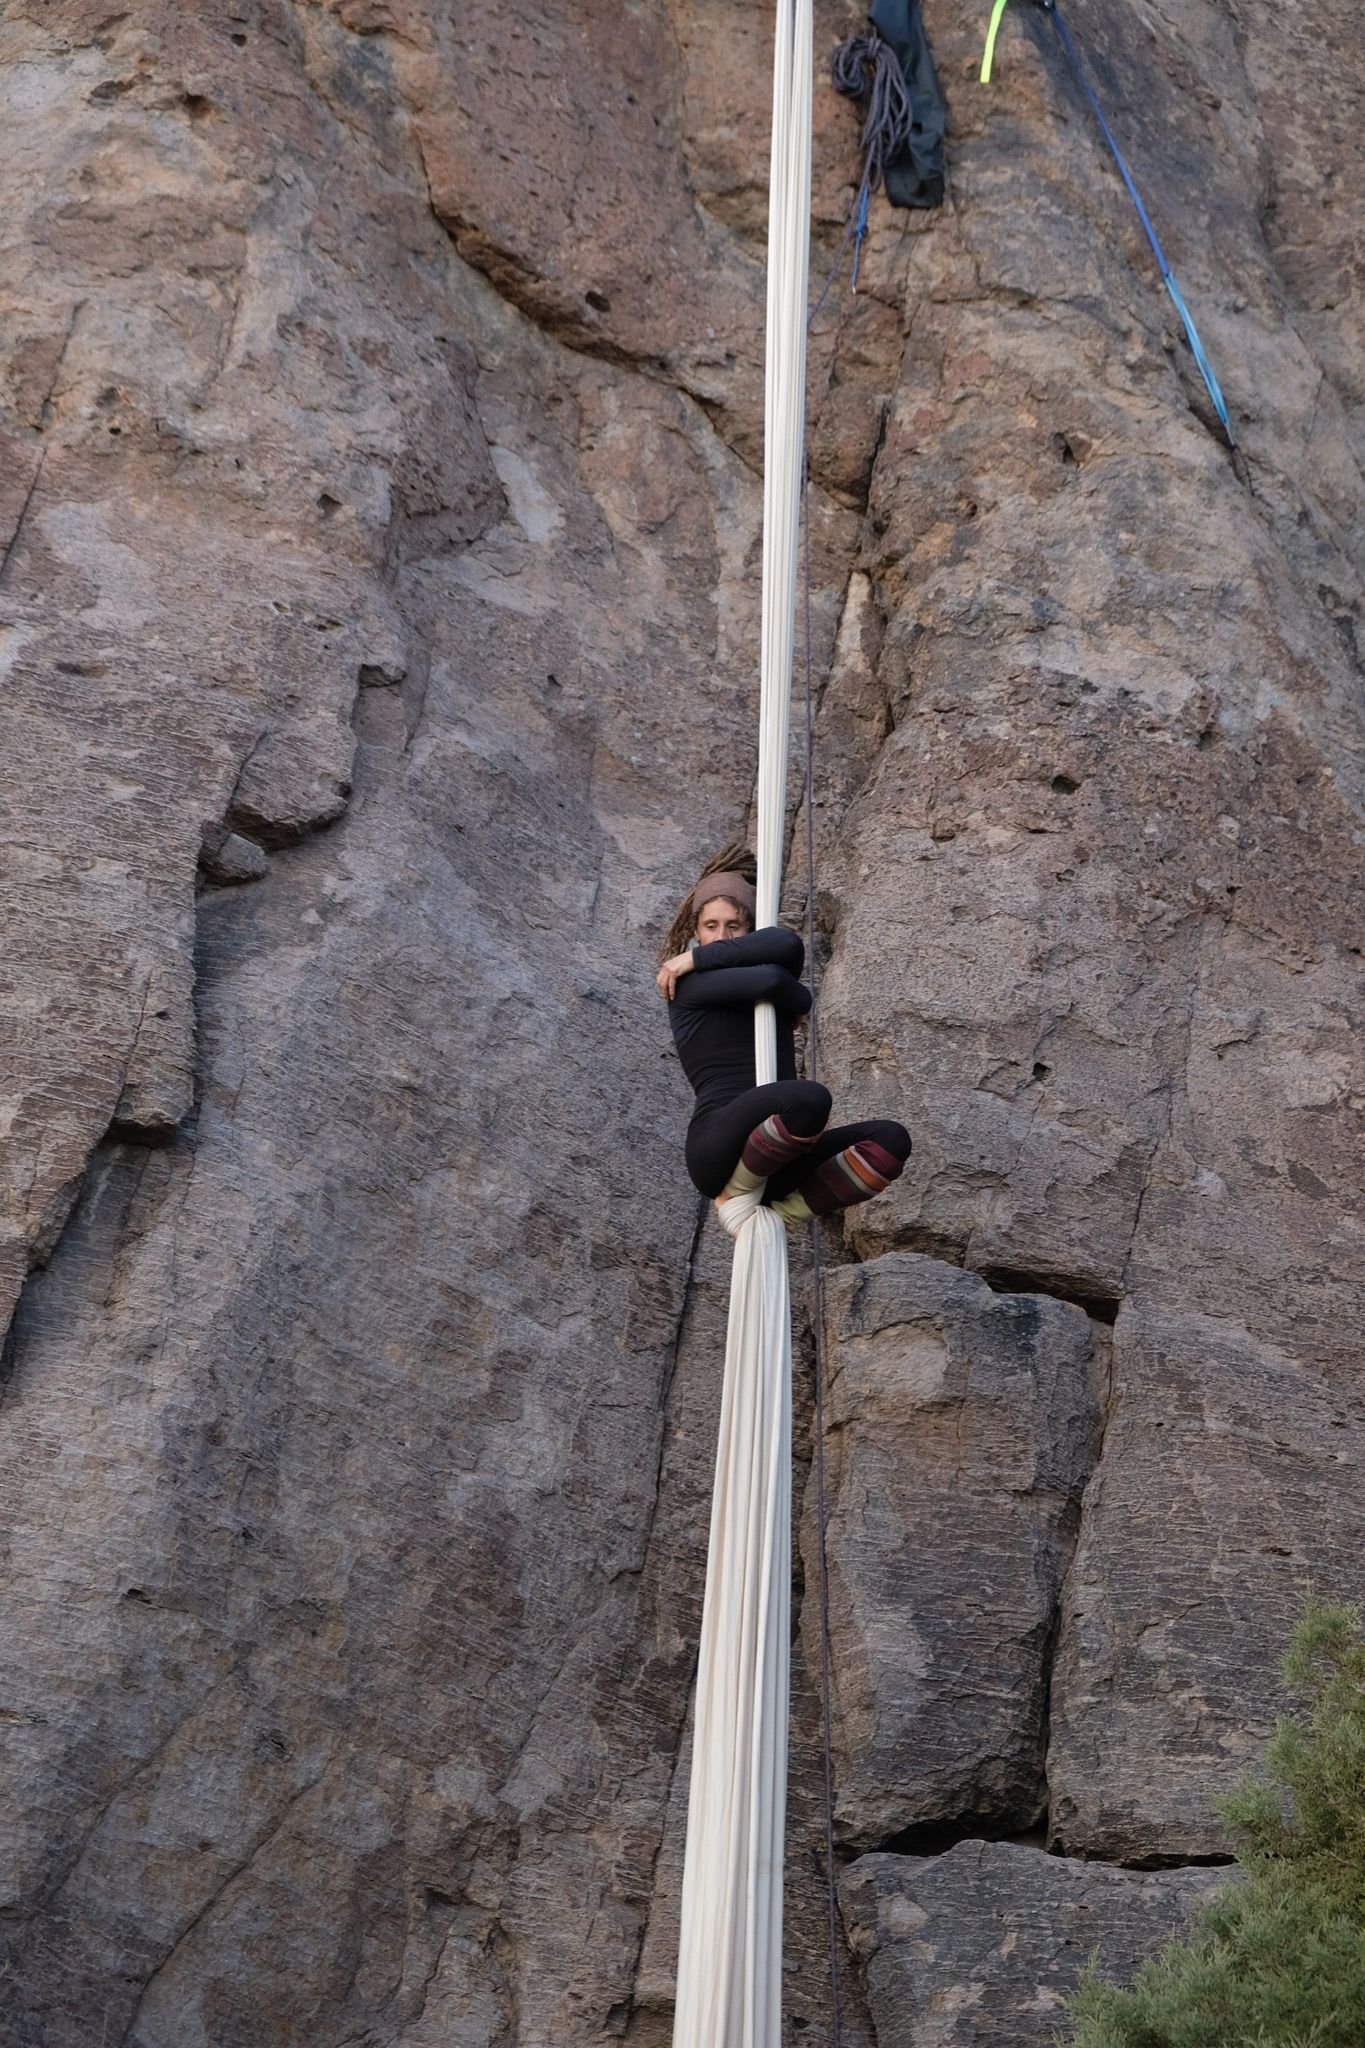 Woman hangs off apparatus, performing aerial silks with white fabric, off cliff face